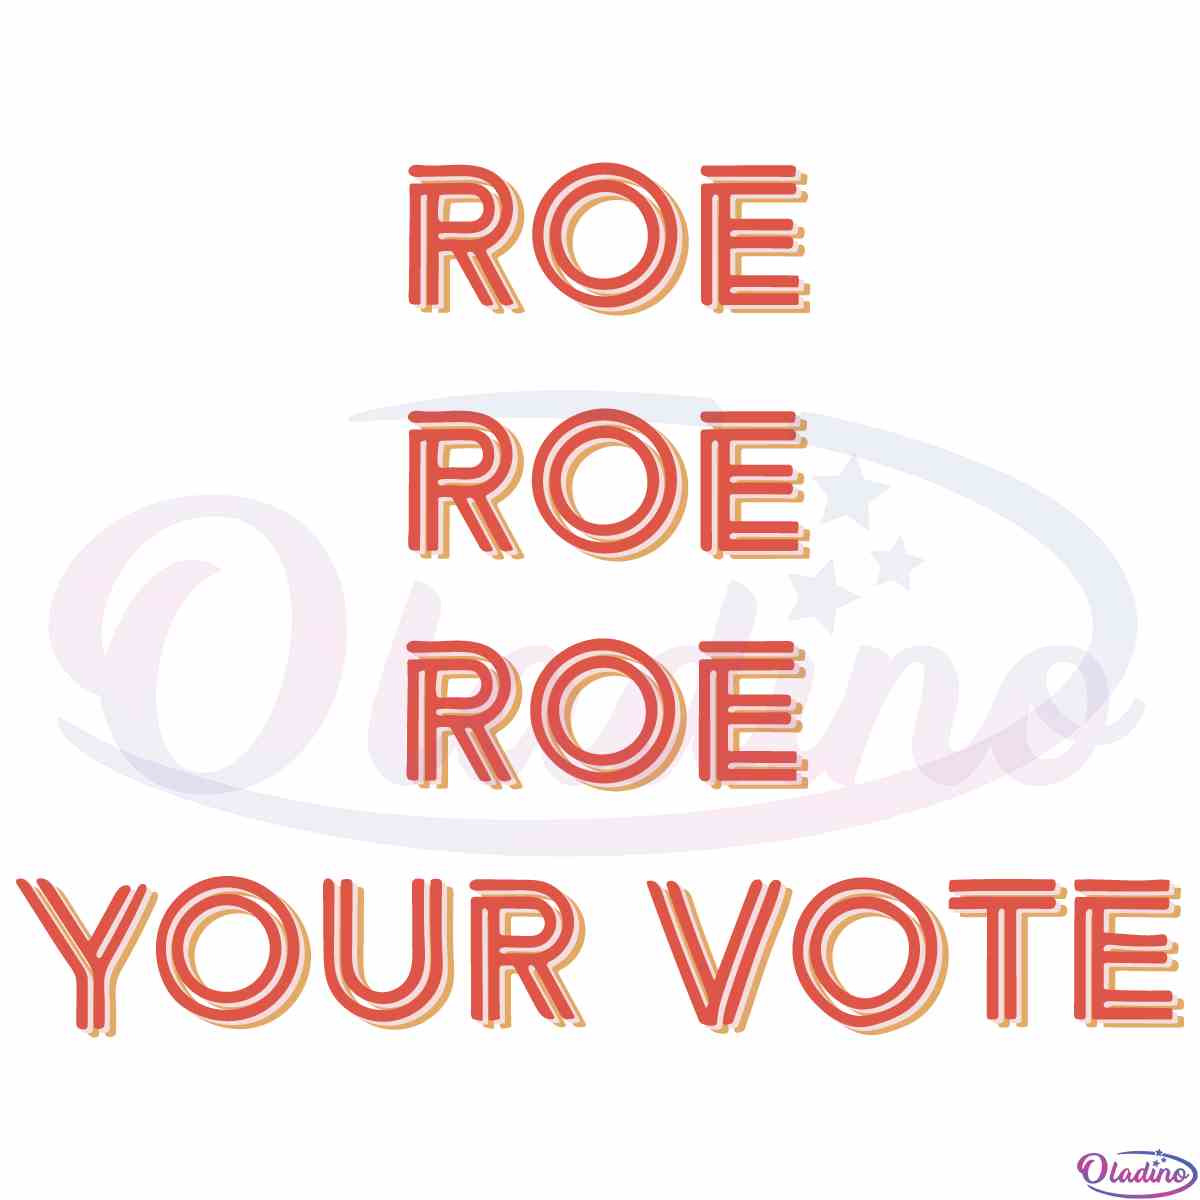 roe-roe-roe-your-vote-were-ruthless-svg-cricut-design-space